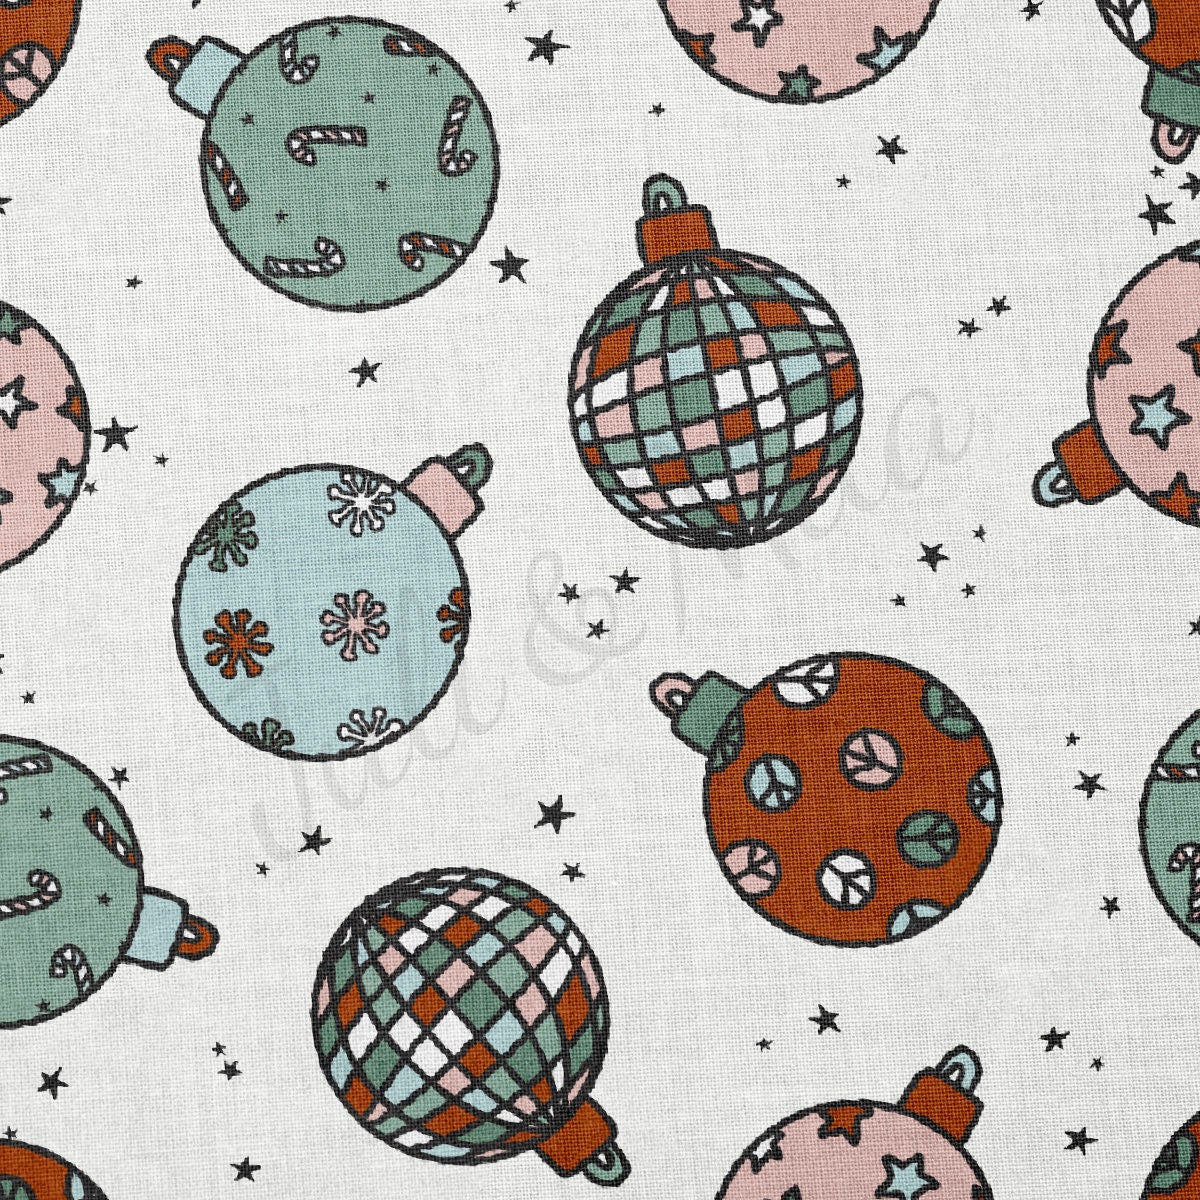 100% Cotton Fabric By the Yard Printed in USA Cotton Sateen -  Cotton CNT2017 Christmas